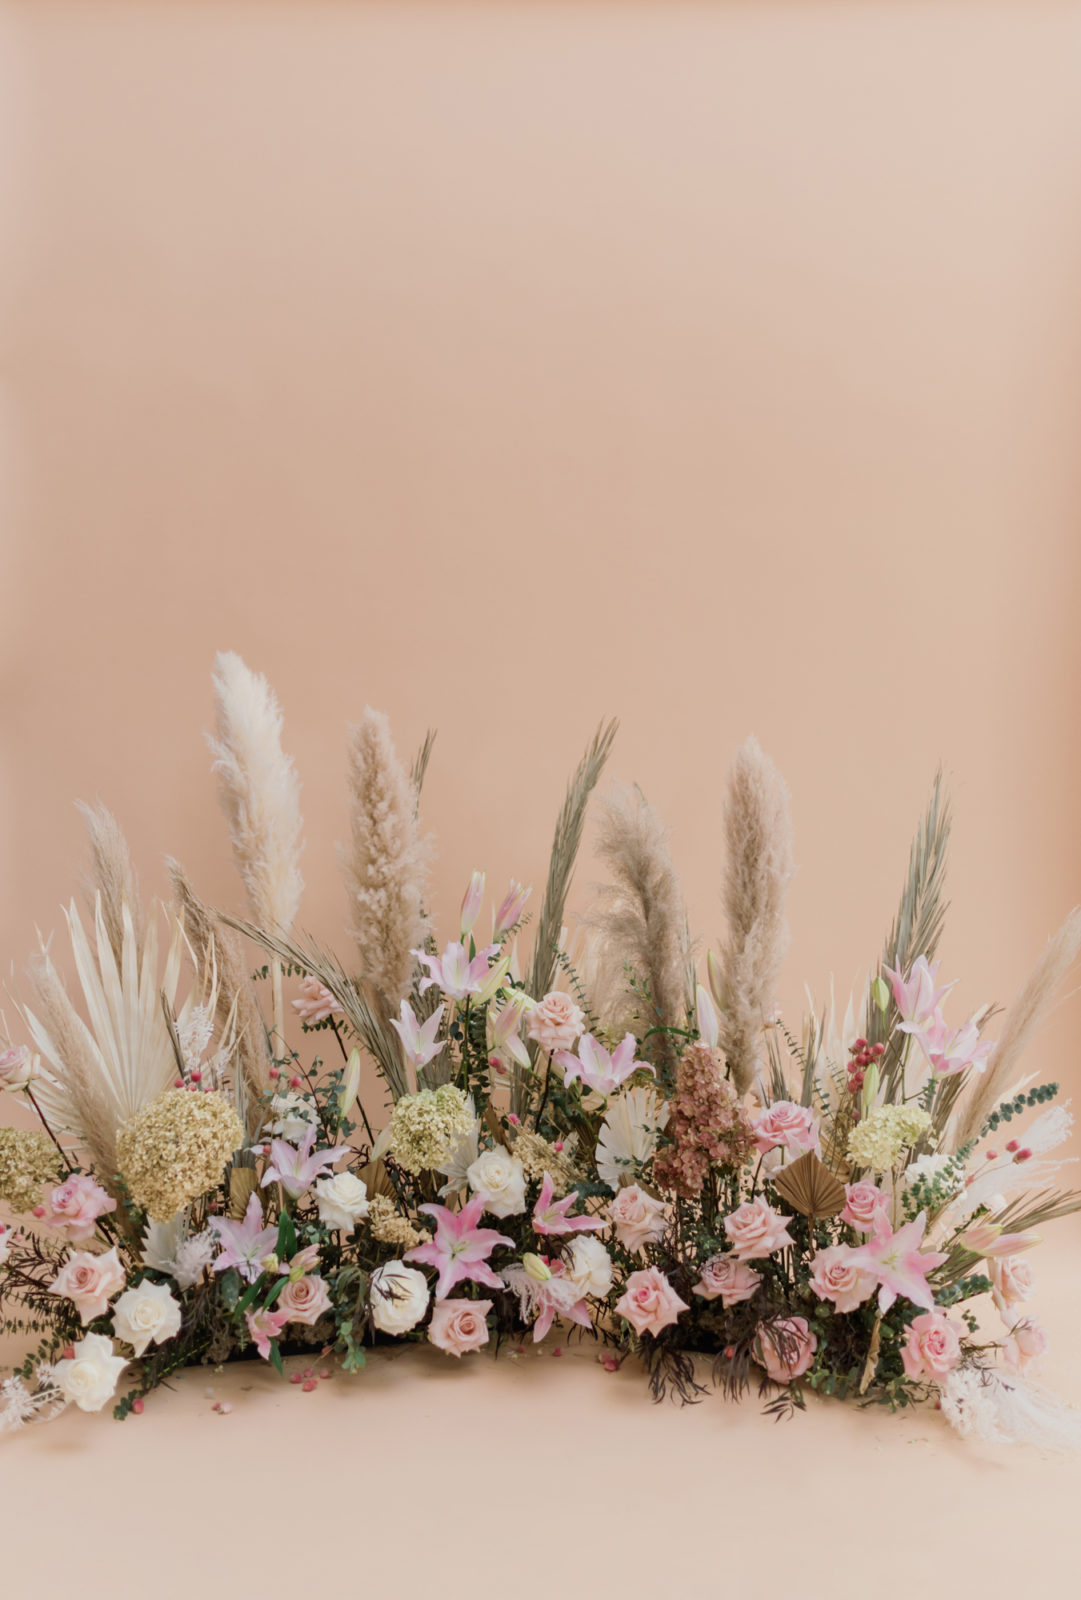 A mix of pink and white blooms, dried grasses, pampas grass and greenery against a peach backdrop